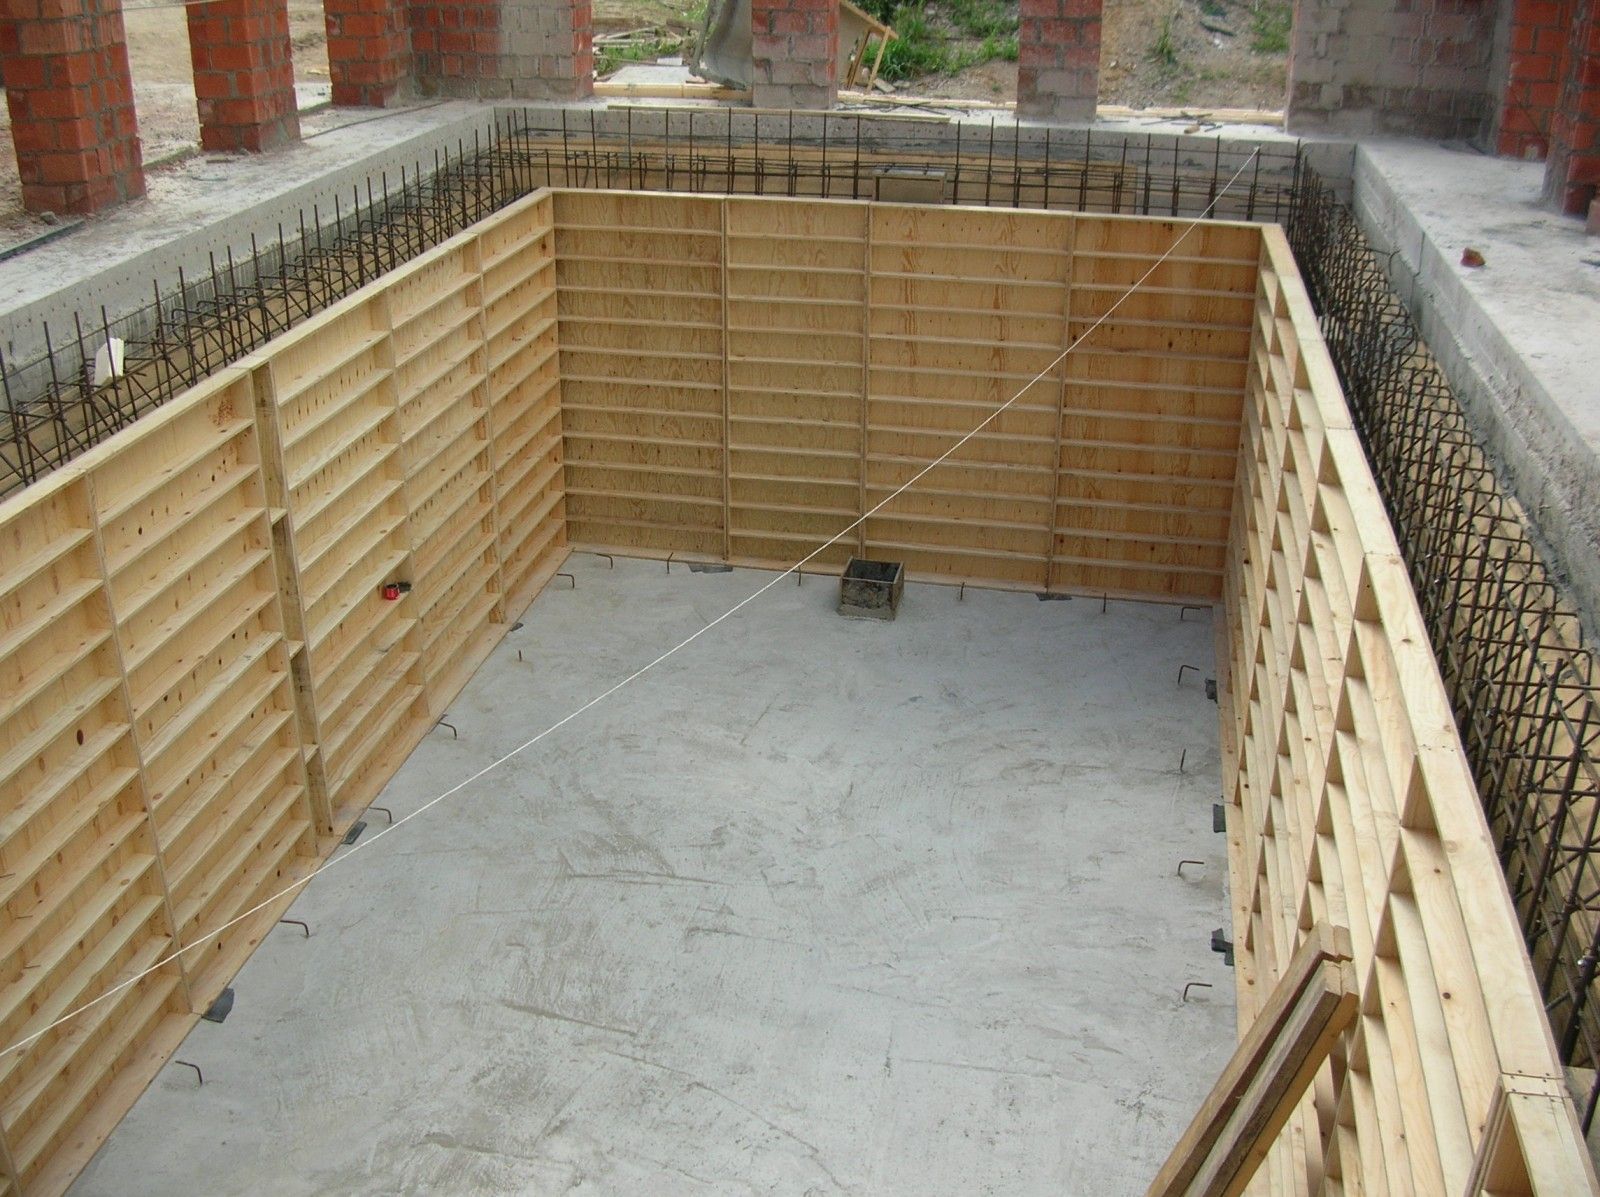 Formwork of the walls